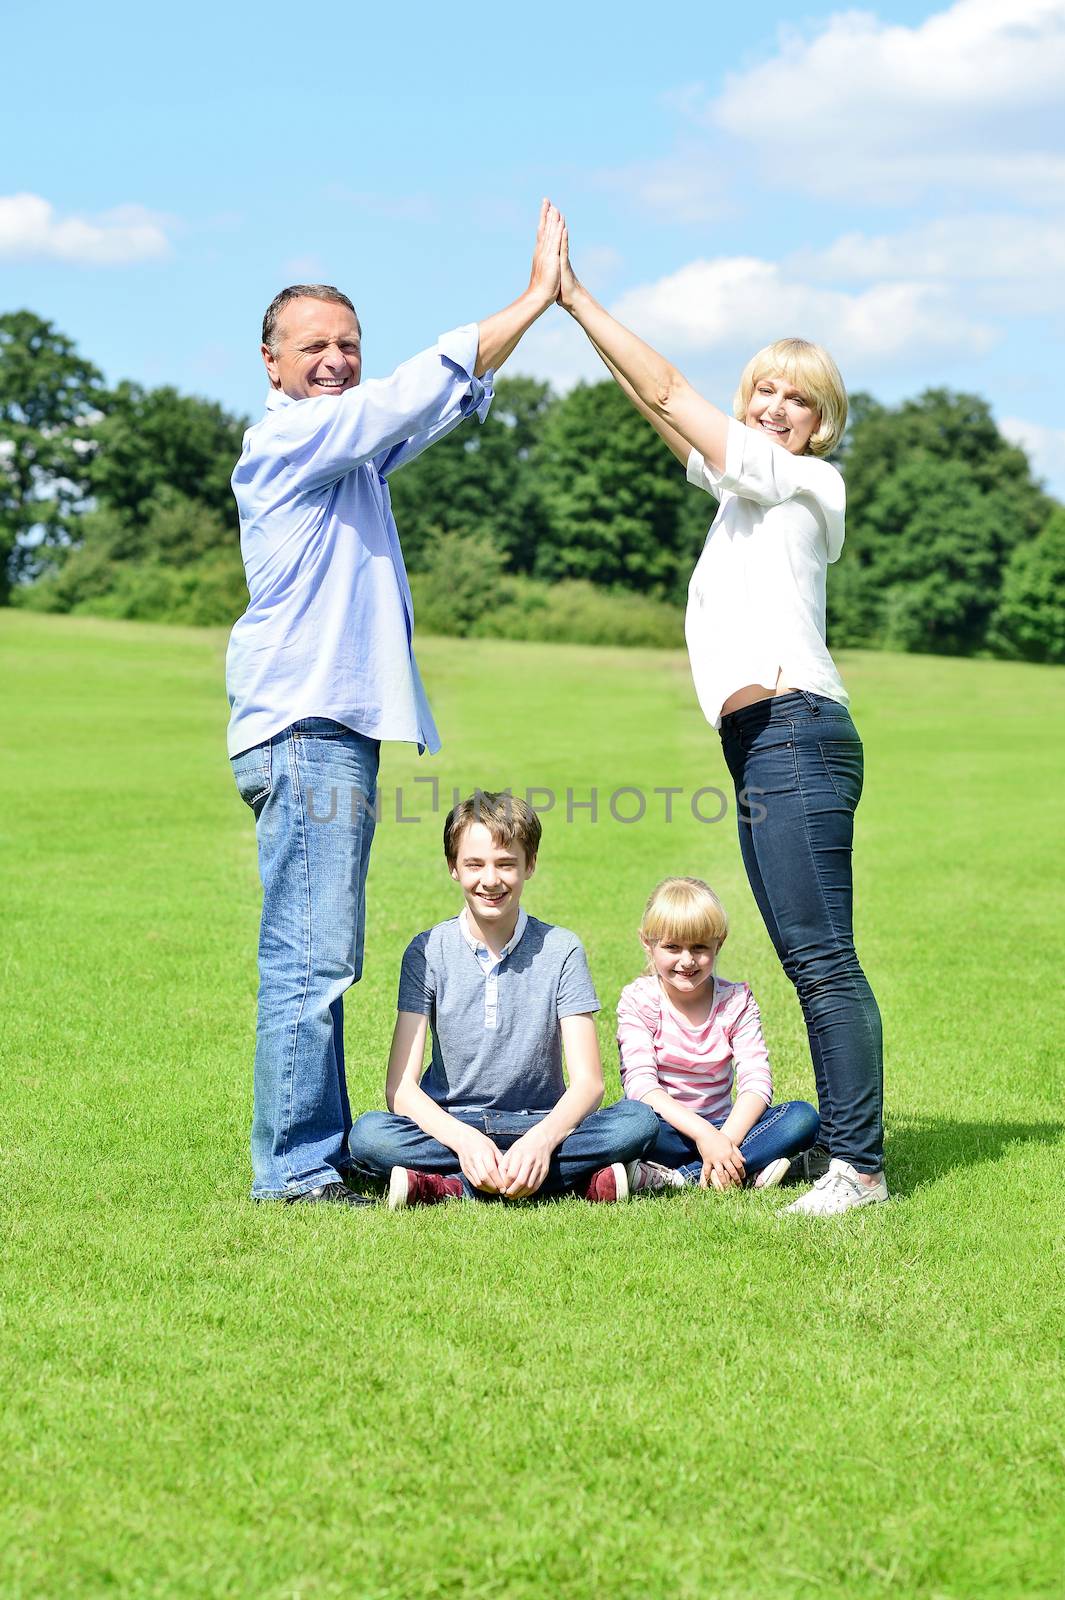 Affectionate family having fun together